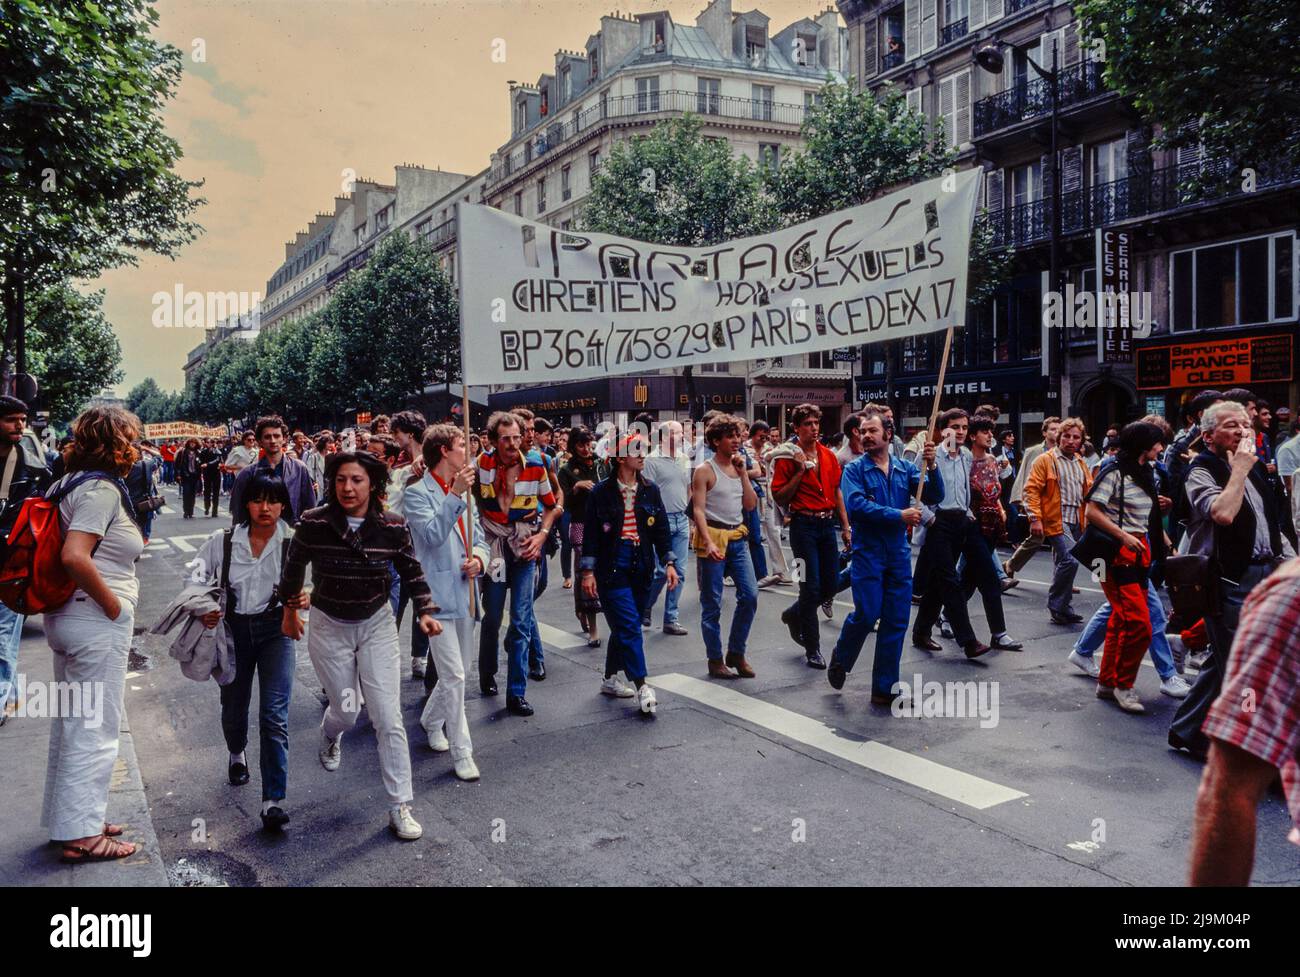 Paris, France, Large Crowd People, Marching with Protest Banners 'Christians and Homosexuals', LGBT Fierté, Gay Pride March, 1982, 1980s gay protest vintage, Christian ACTIVISM, paris archive photos Stock Photo